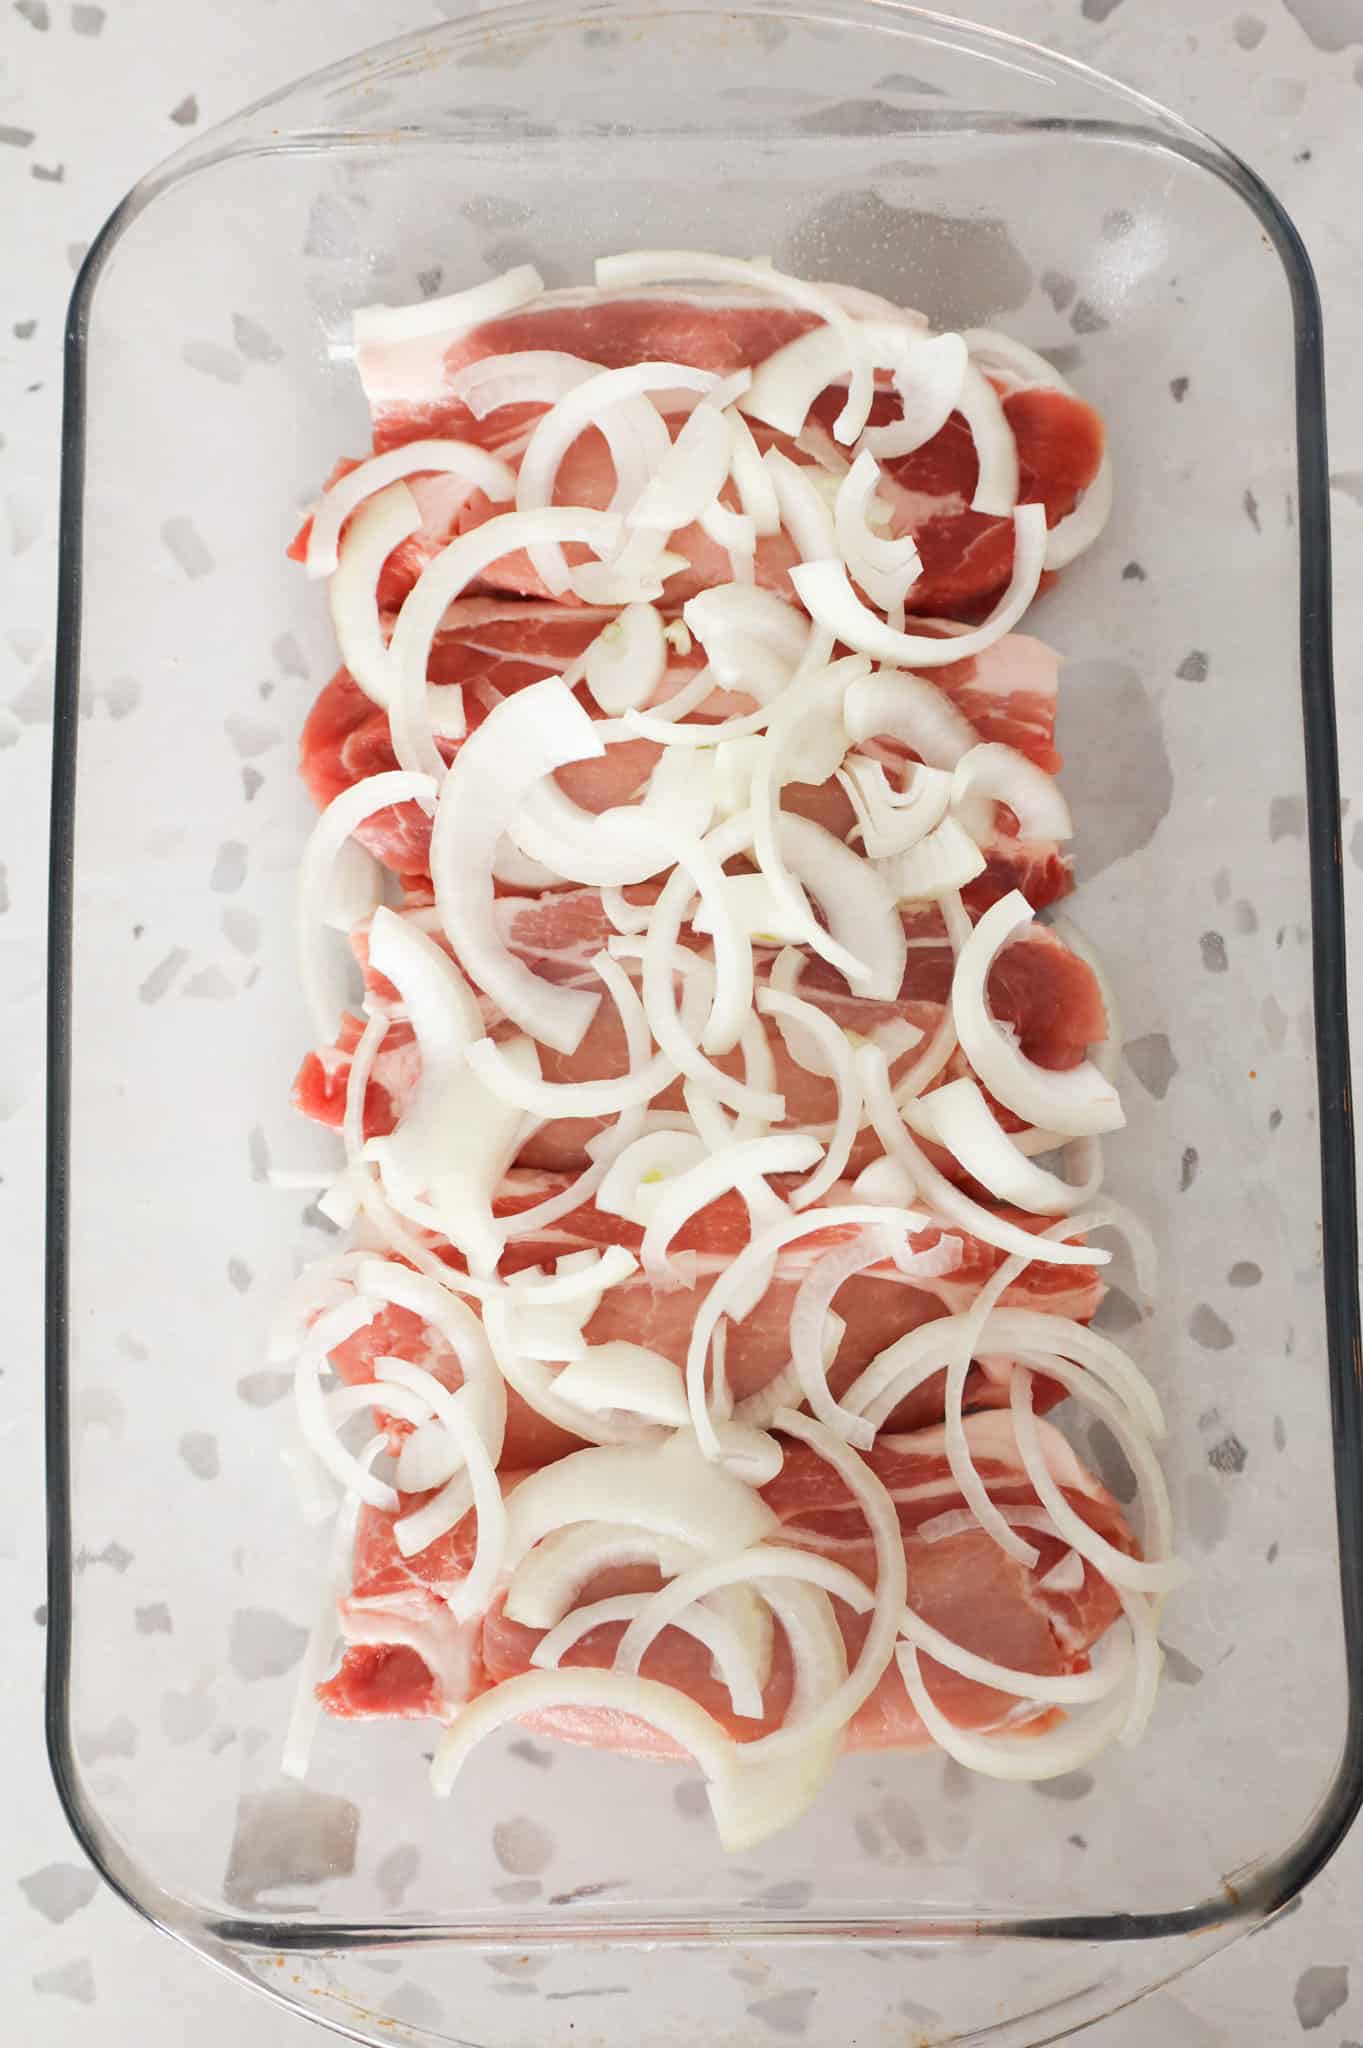 sliced onions on top of pork chops in a baking dish